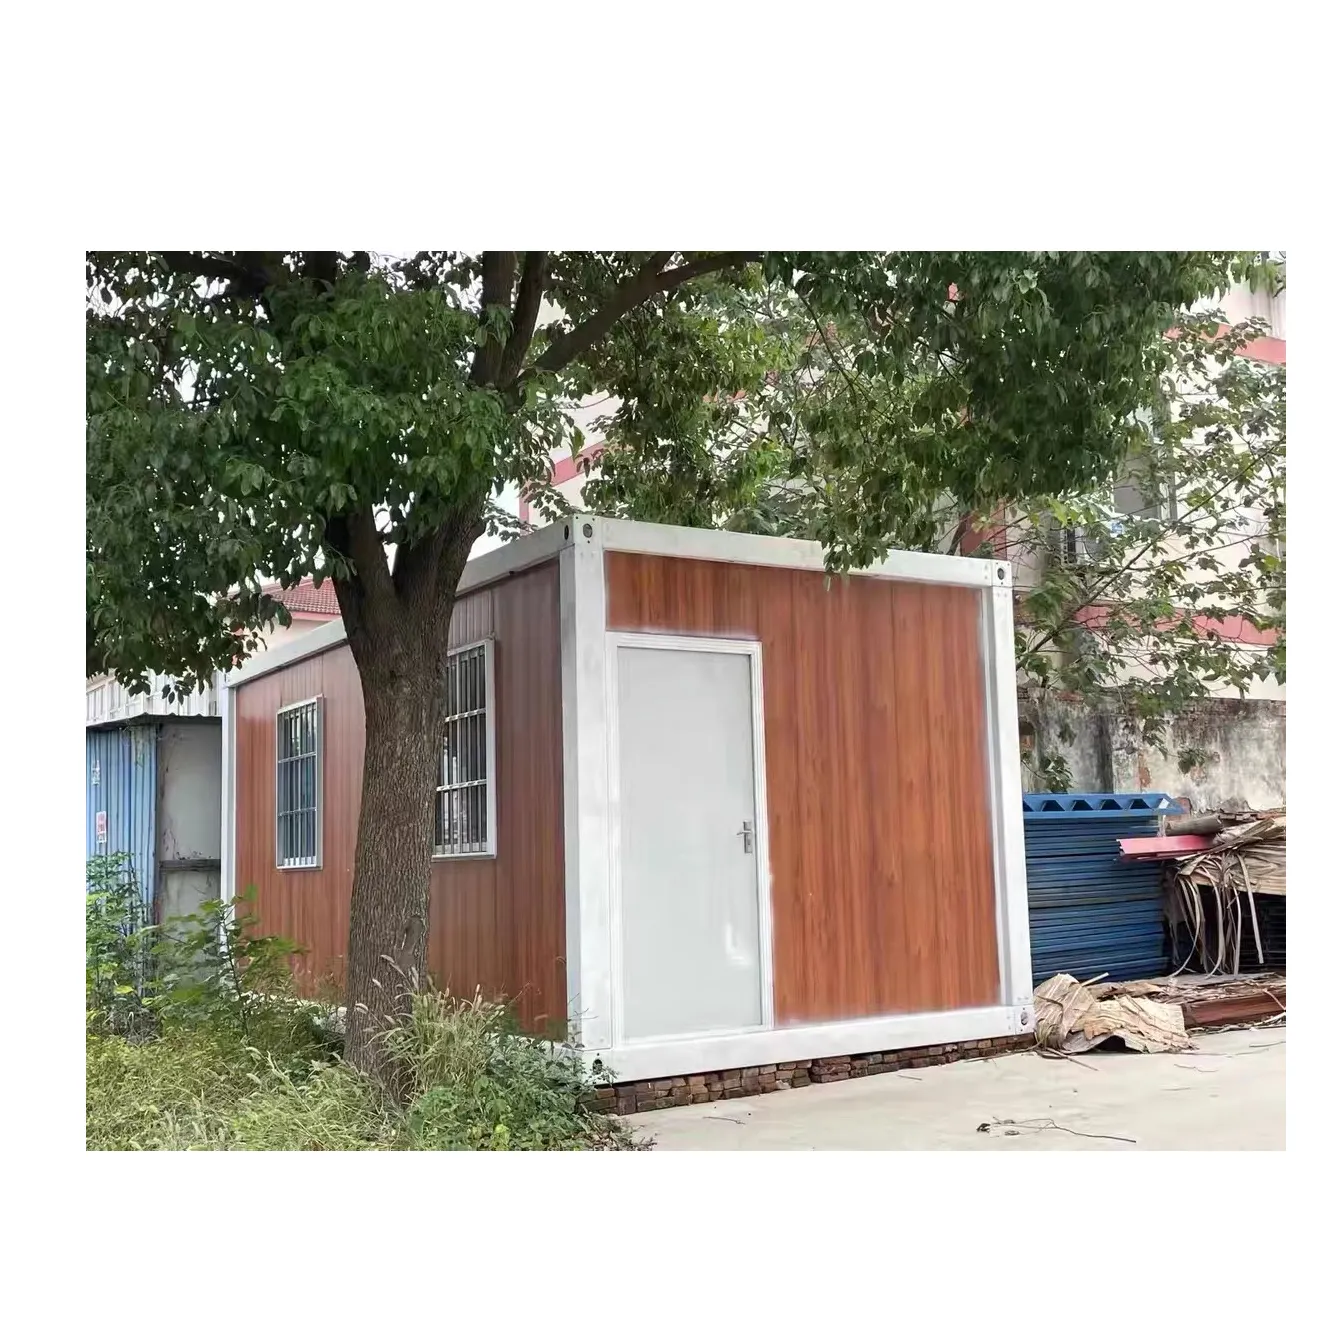 Detachable Container house Prefab mobile Modular tiny home Portable Container office pods back yard cabin unit